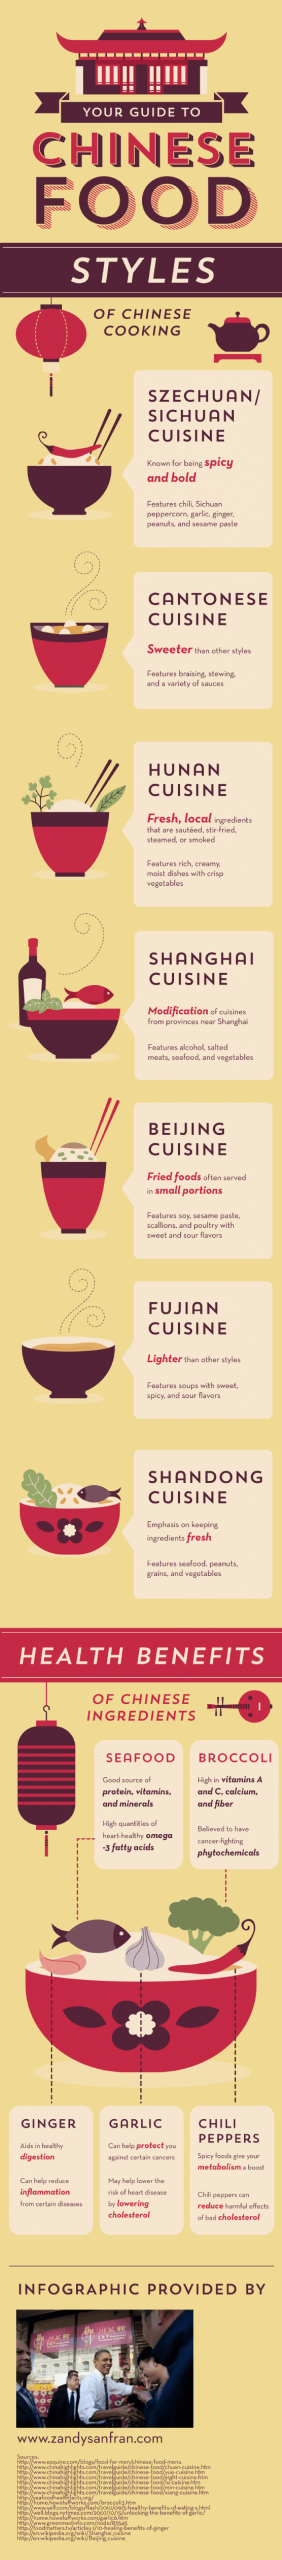 7 Chinese Food Styles Explained